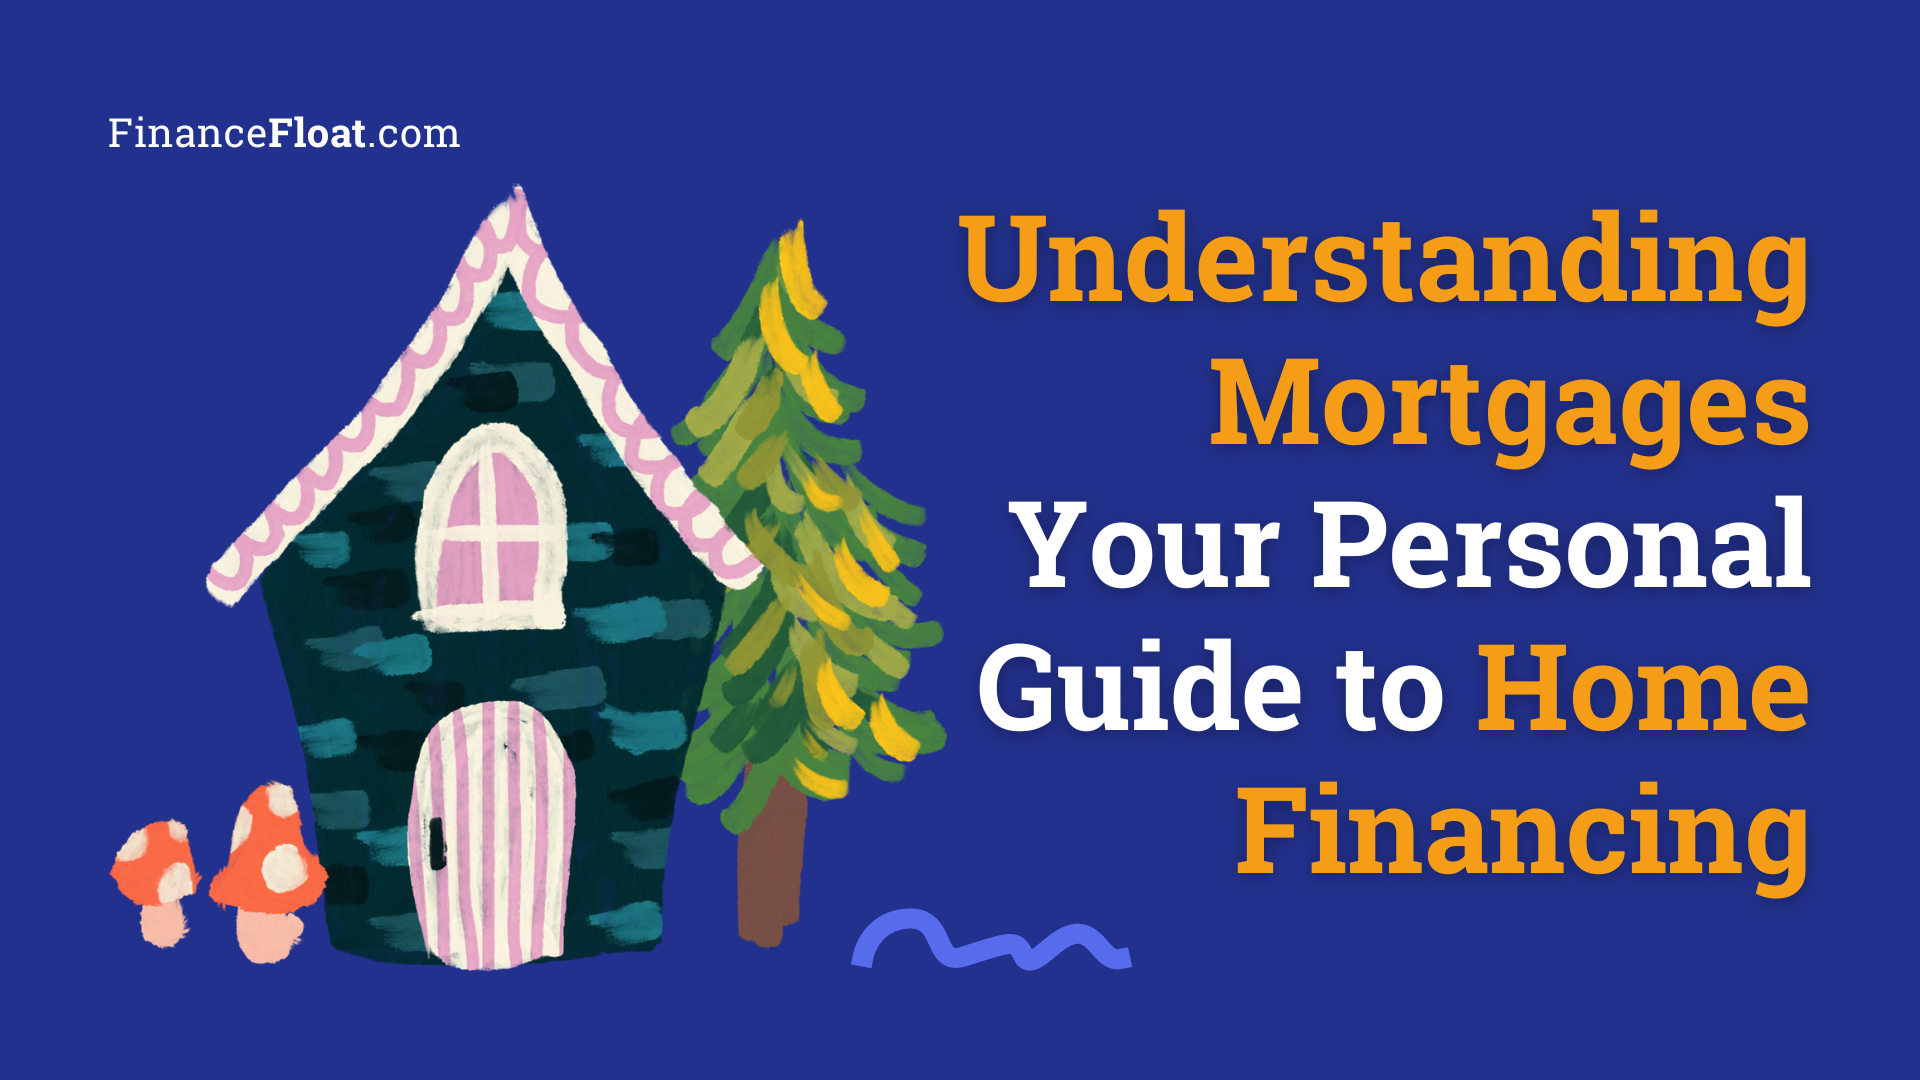 Understanding Mortgages Your Personal Guide to Home Financing